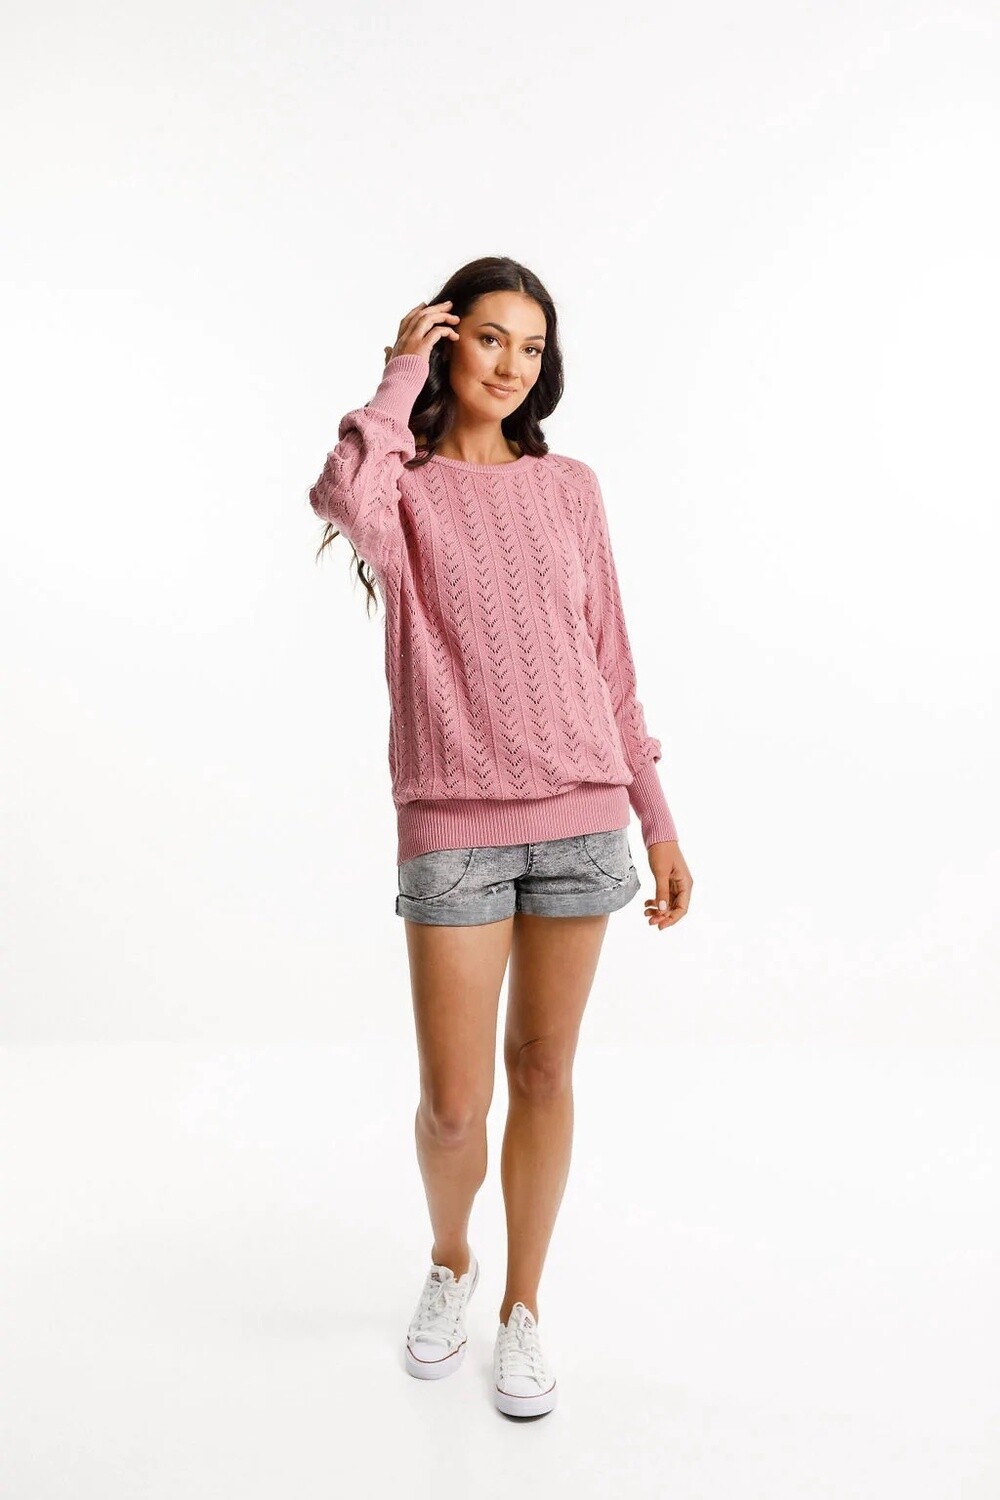 Home-Lee - Knitted Grace Crew - Lace Rose